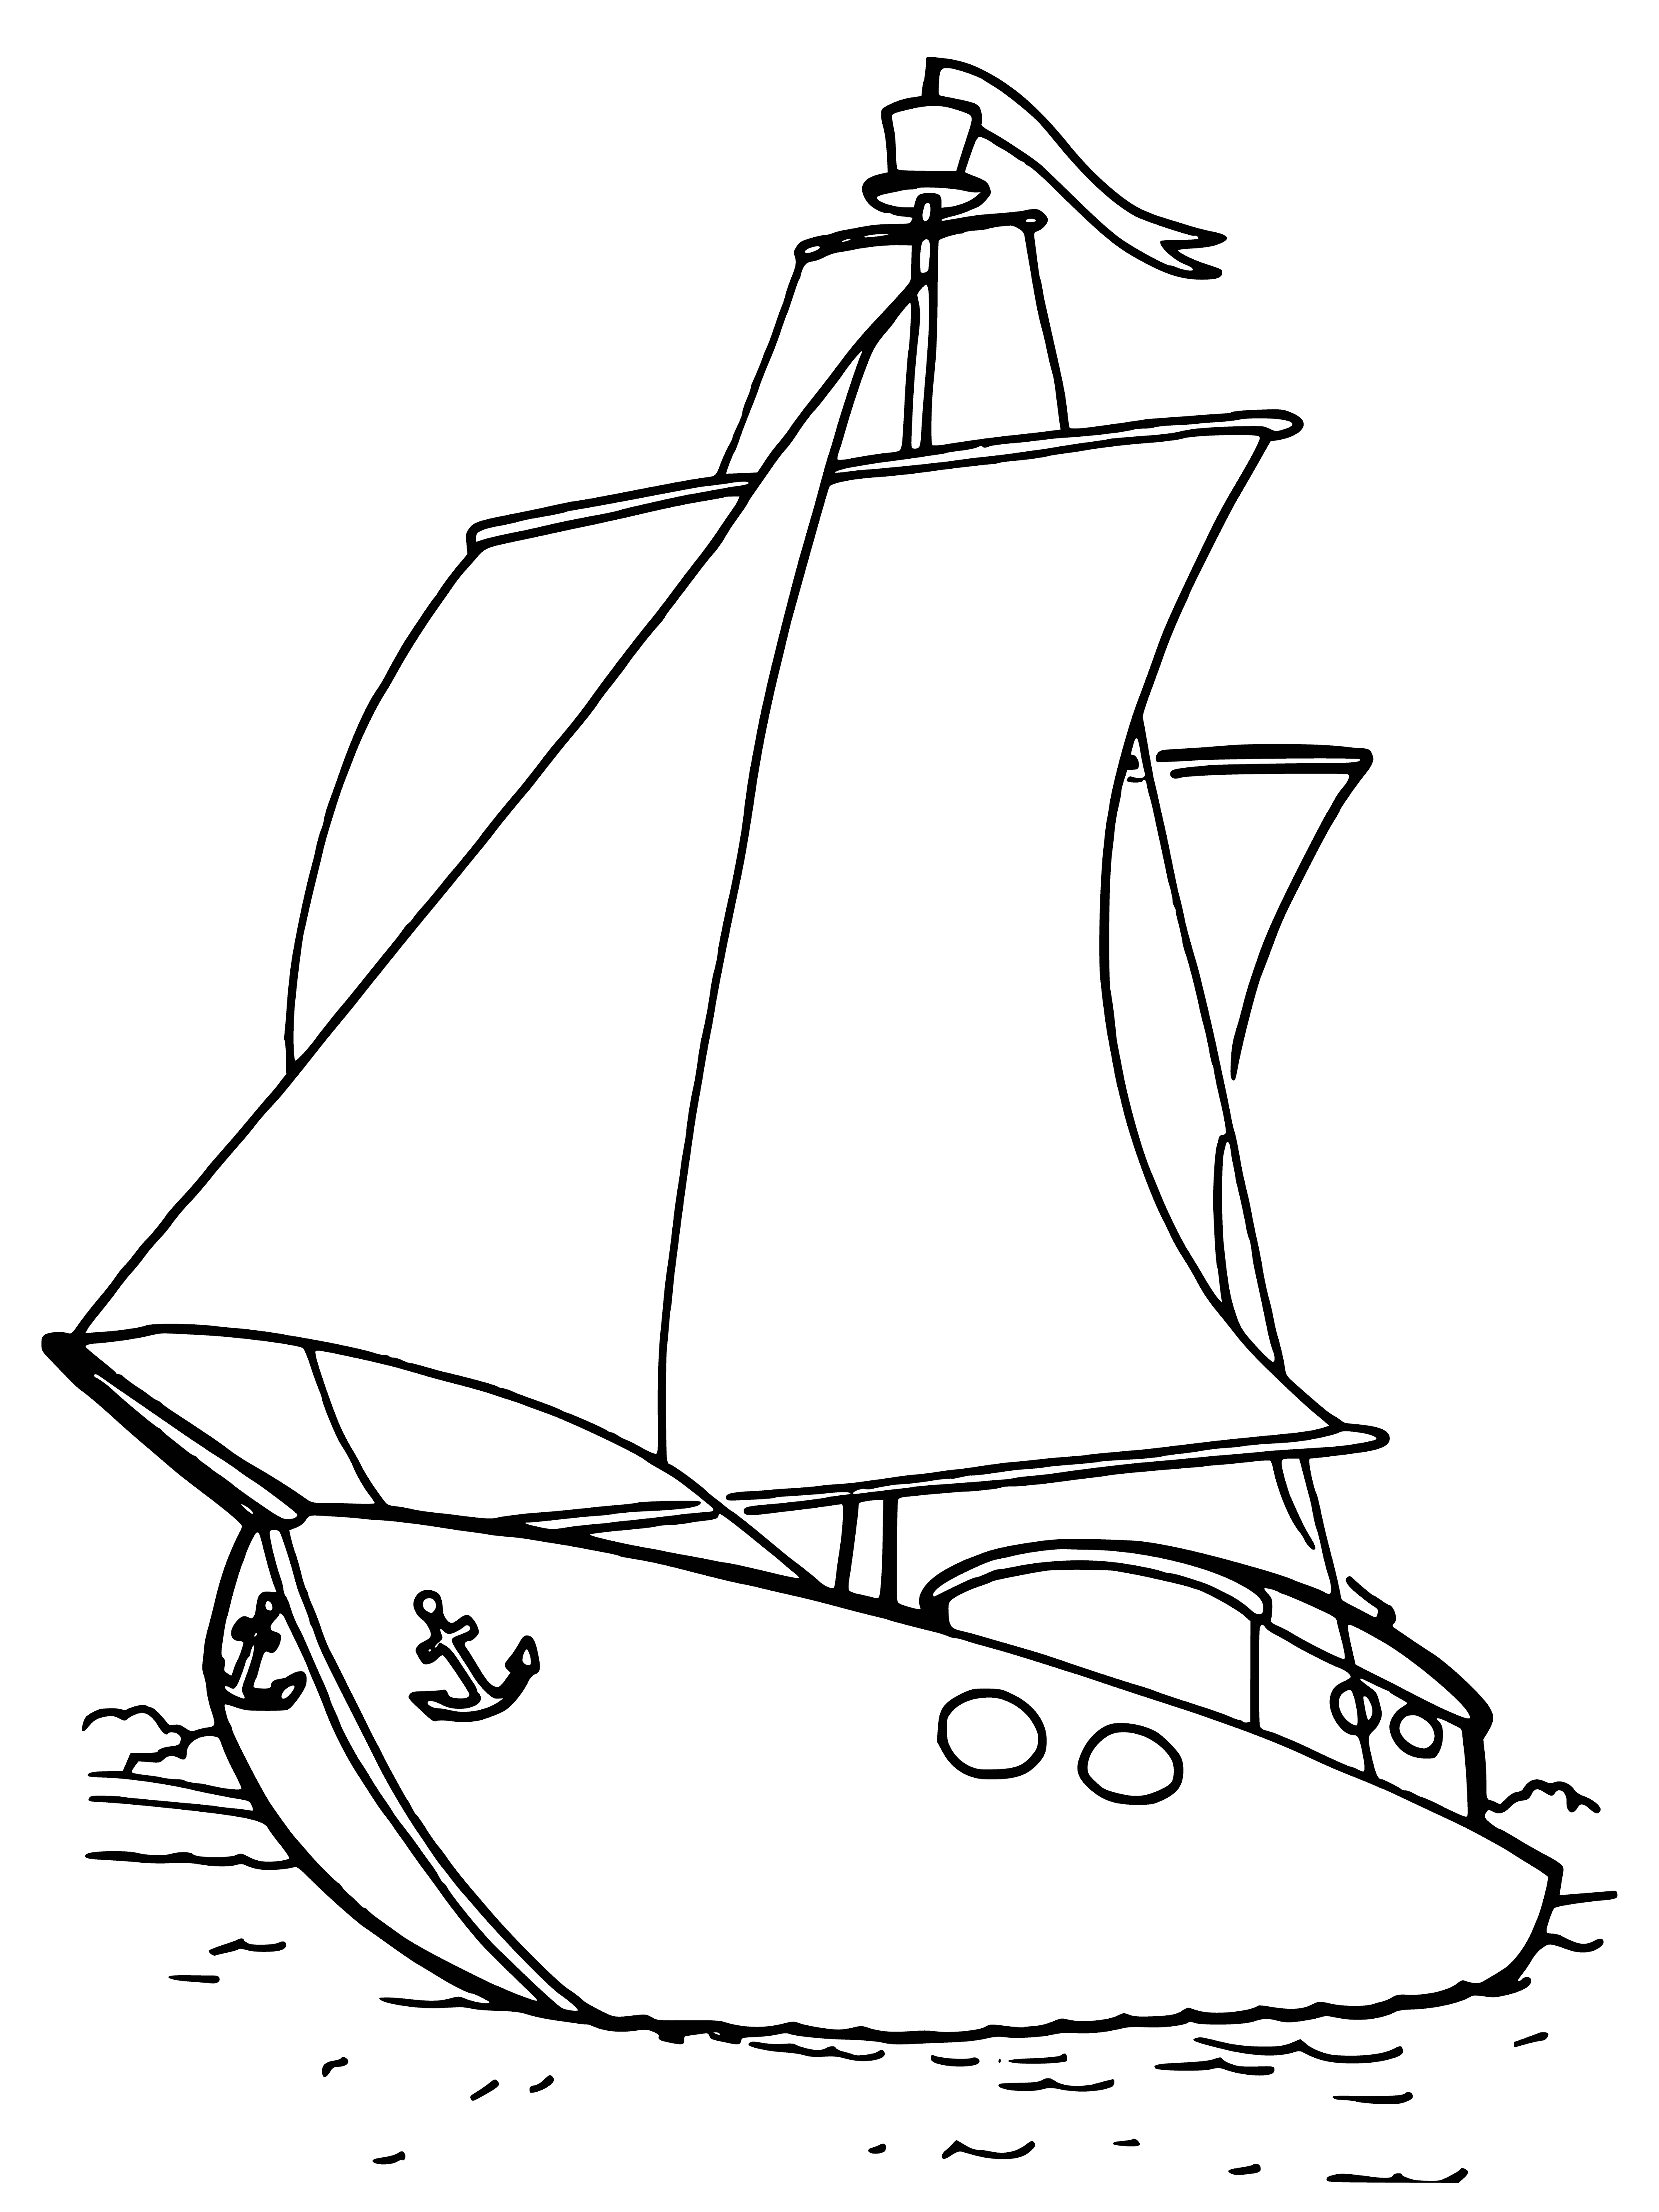 coloring page: Sailing vessels use sails, rigging & masts to propel themselves thru water. Can be monohulls (1 hull) or multihulls (multiple hulls).